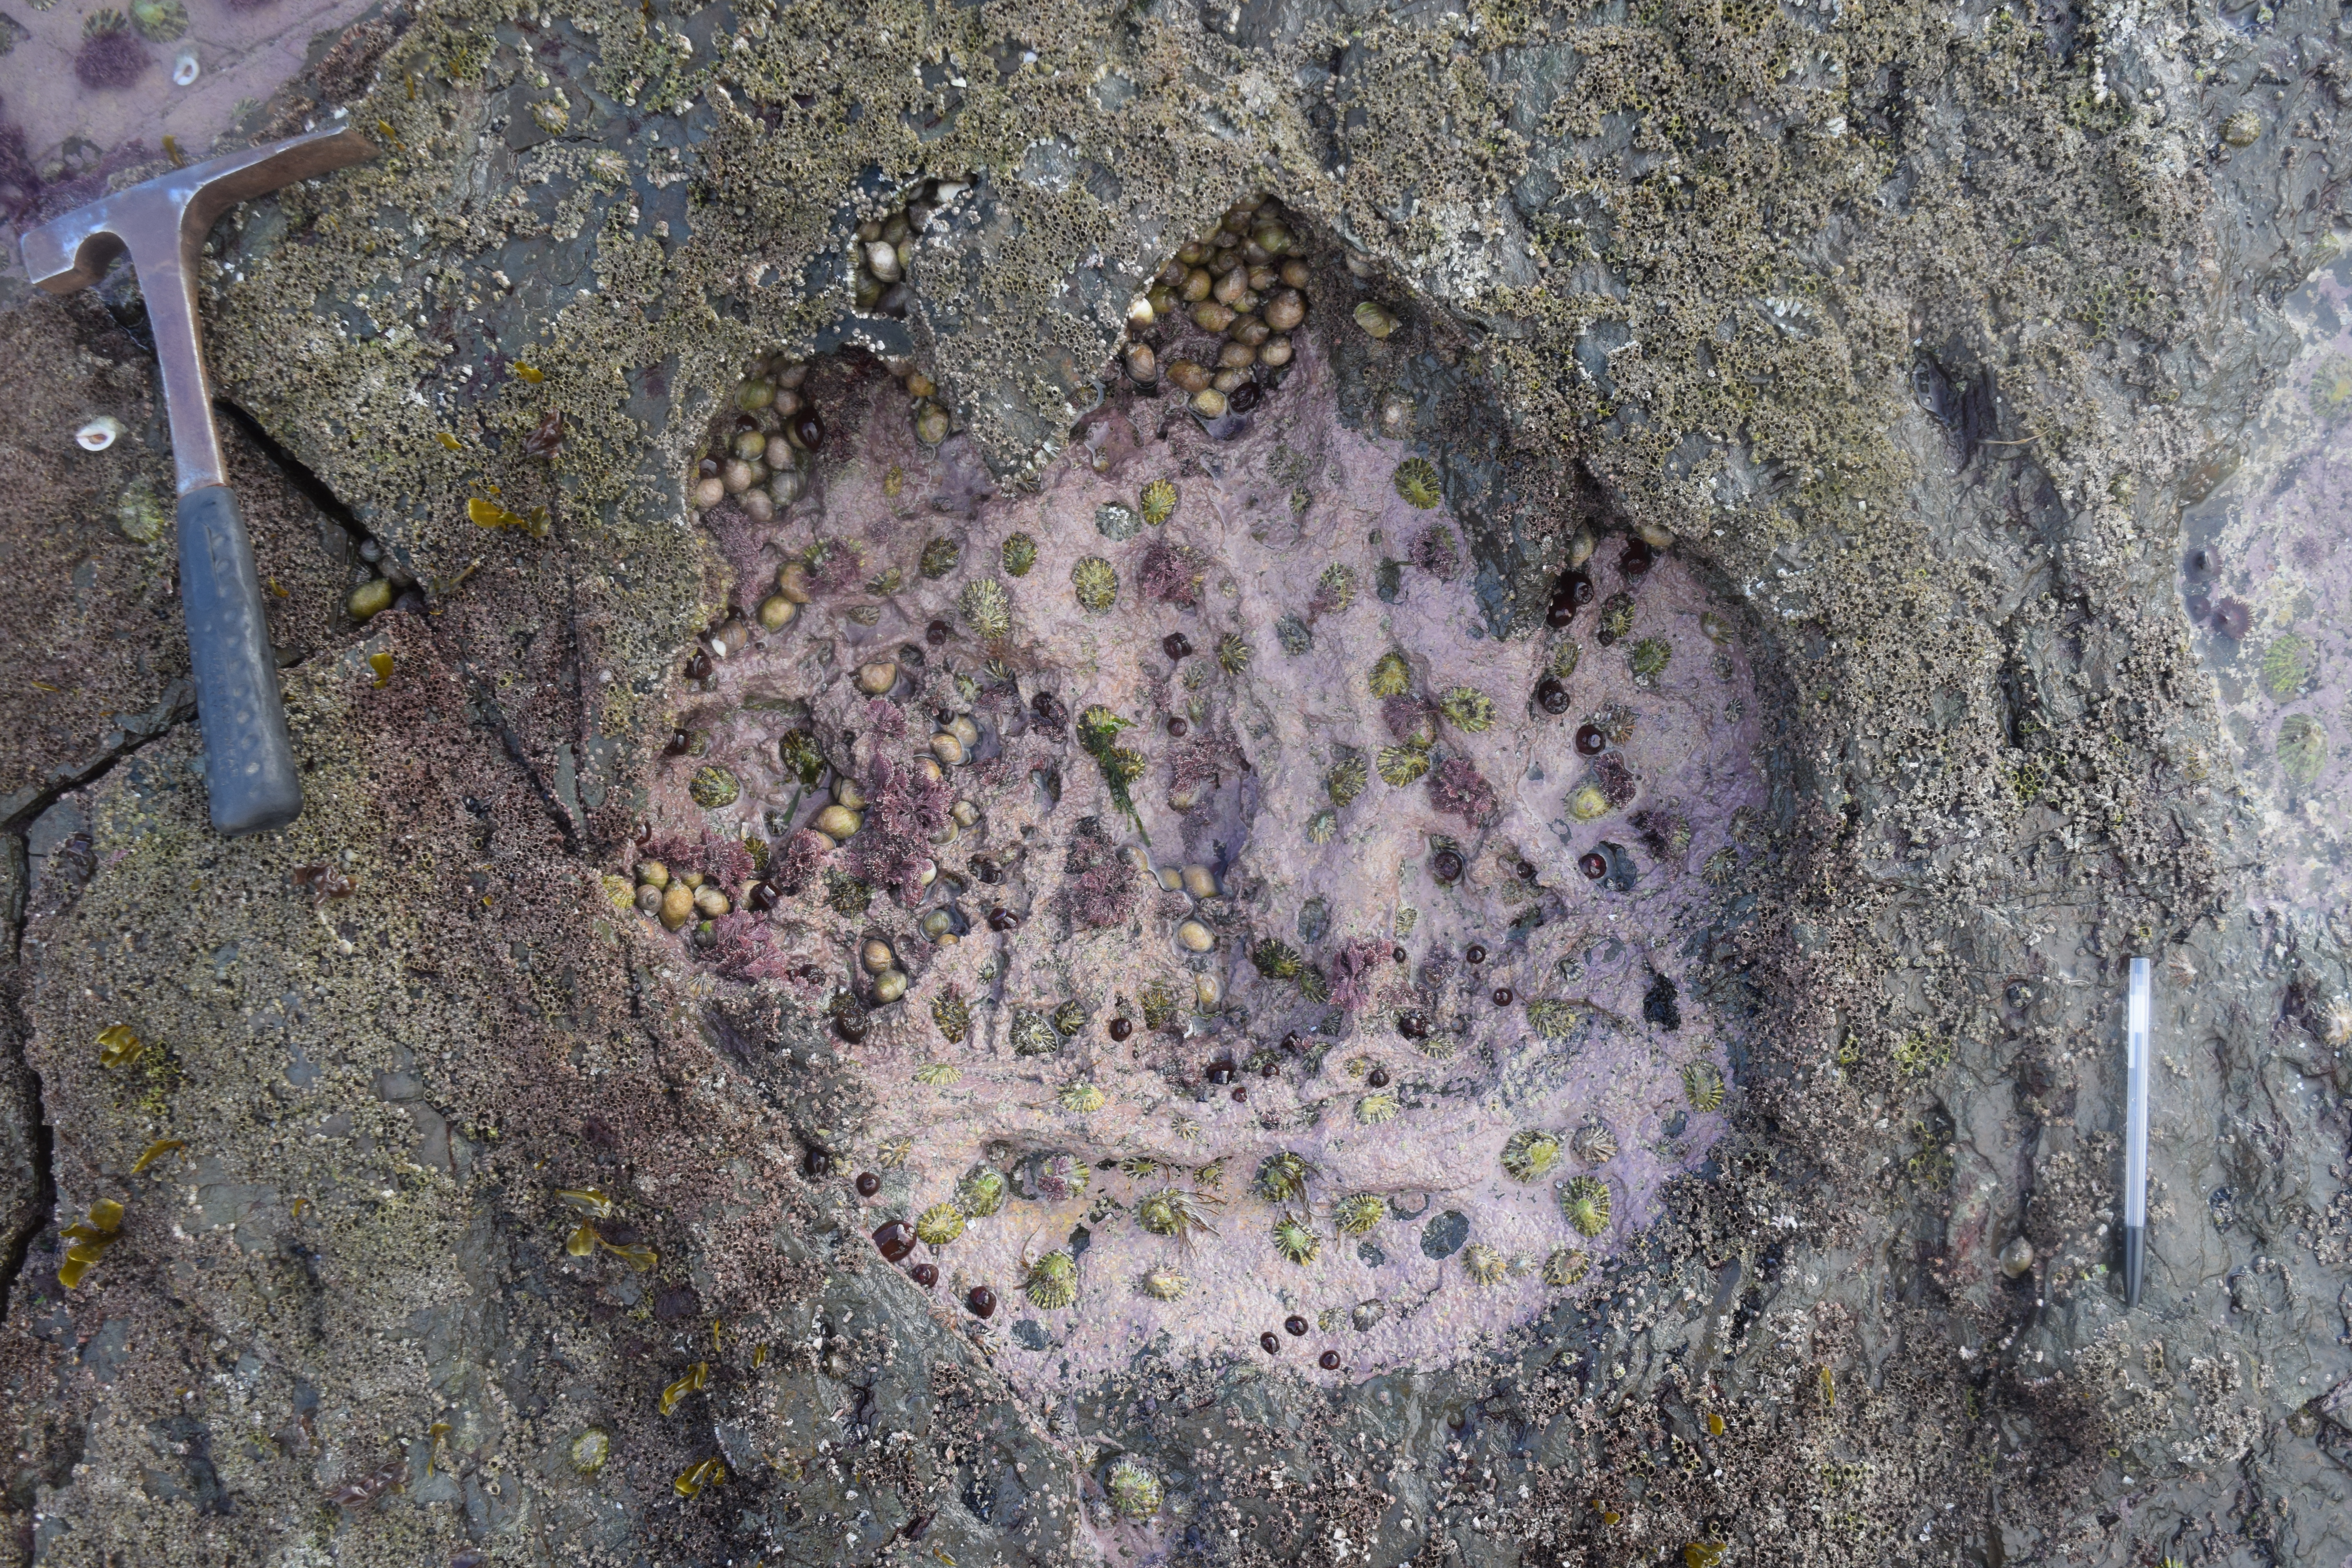 The sauropod footprint shows the giant reptile's toes outlines (Paige dePolo)